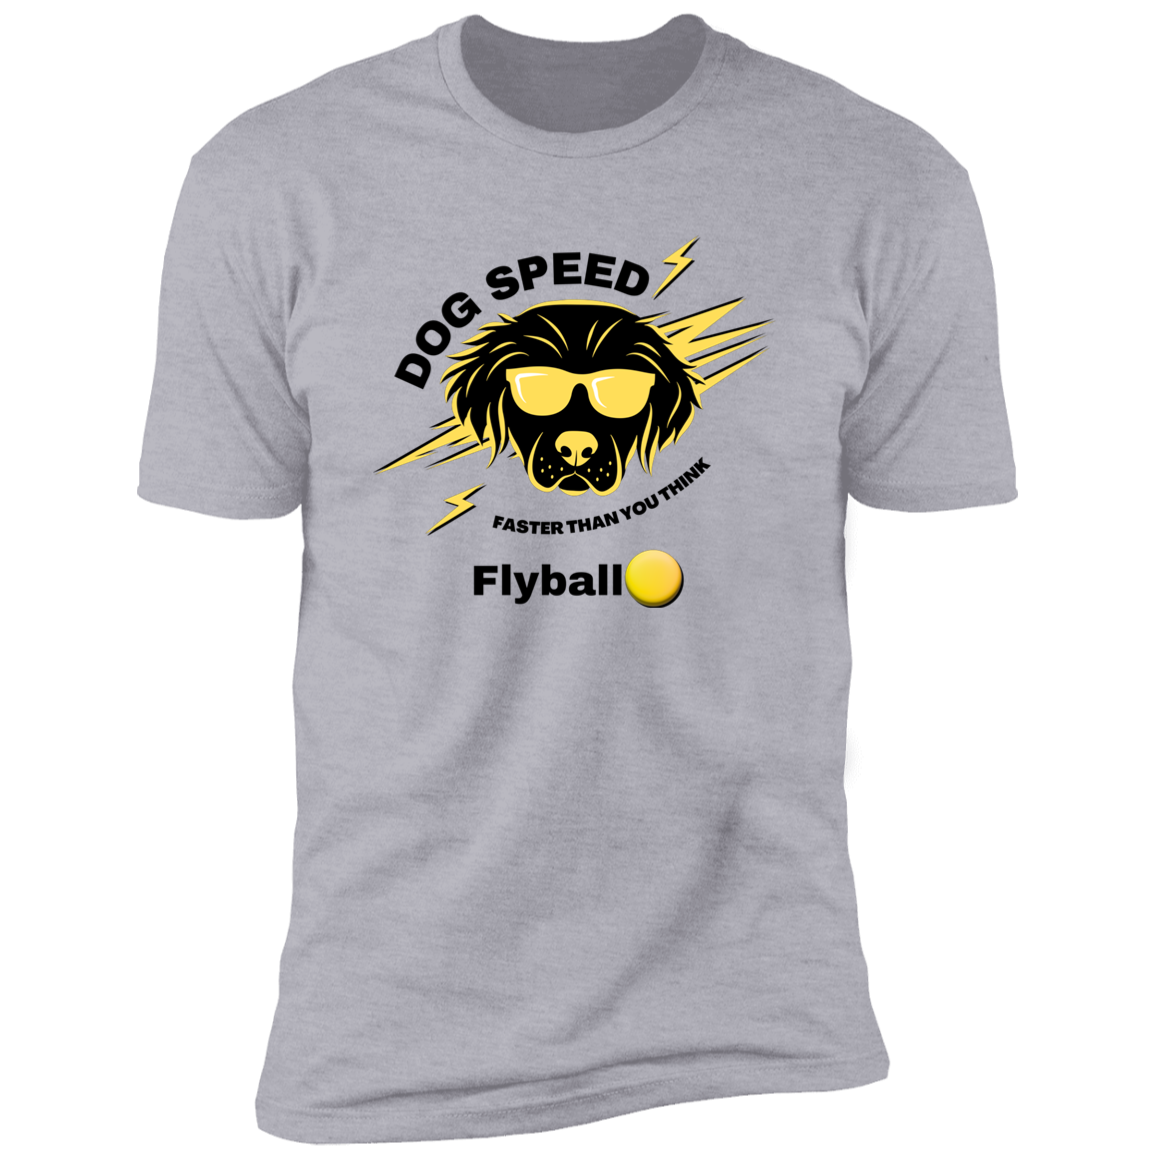 Dog Speed Faster Than You Think Flyball T-shirt, Flyball shirt dog shirt for humans, in light heather gray